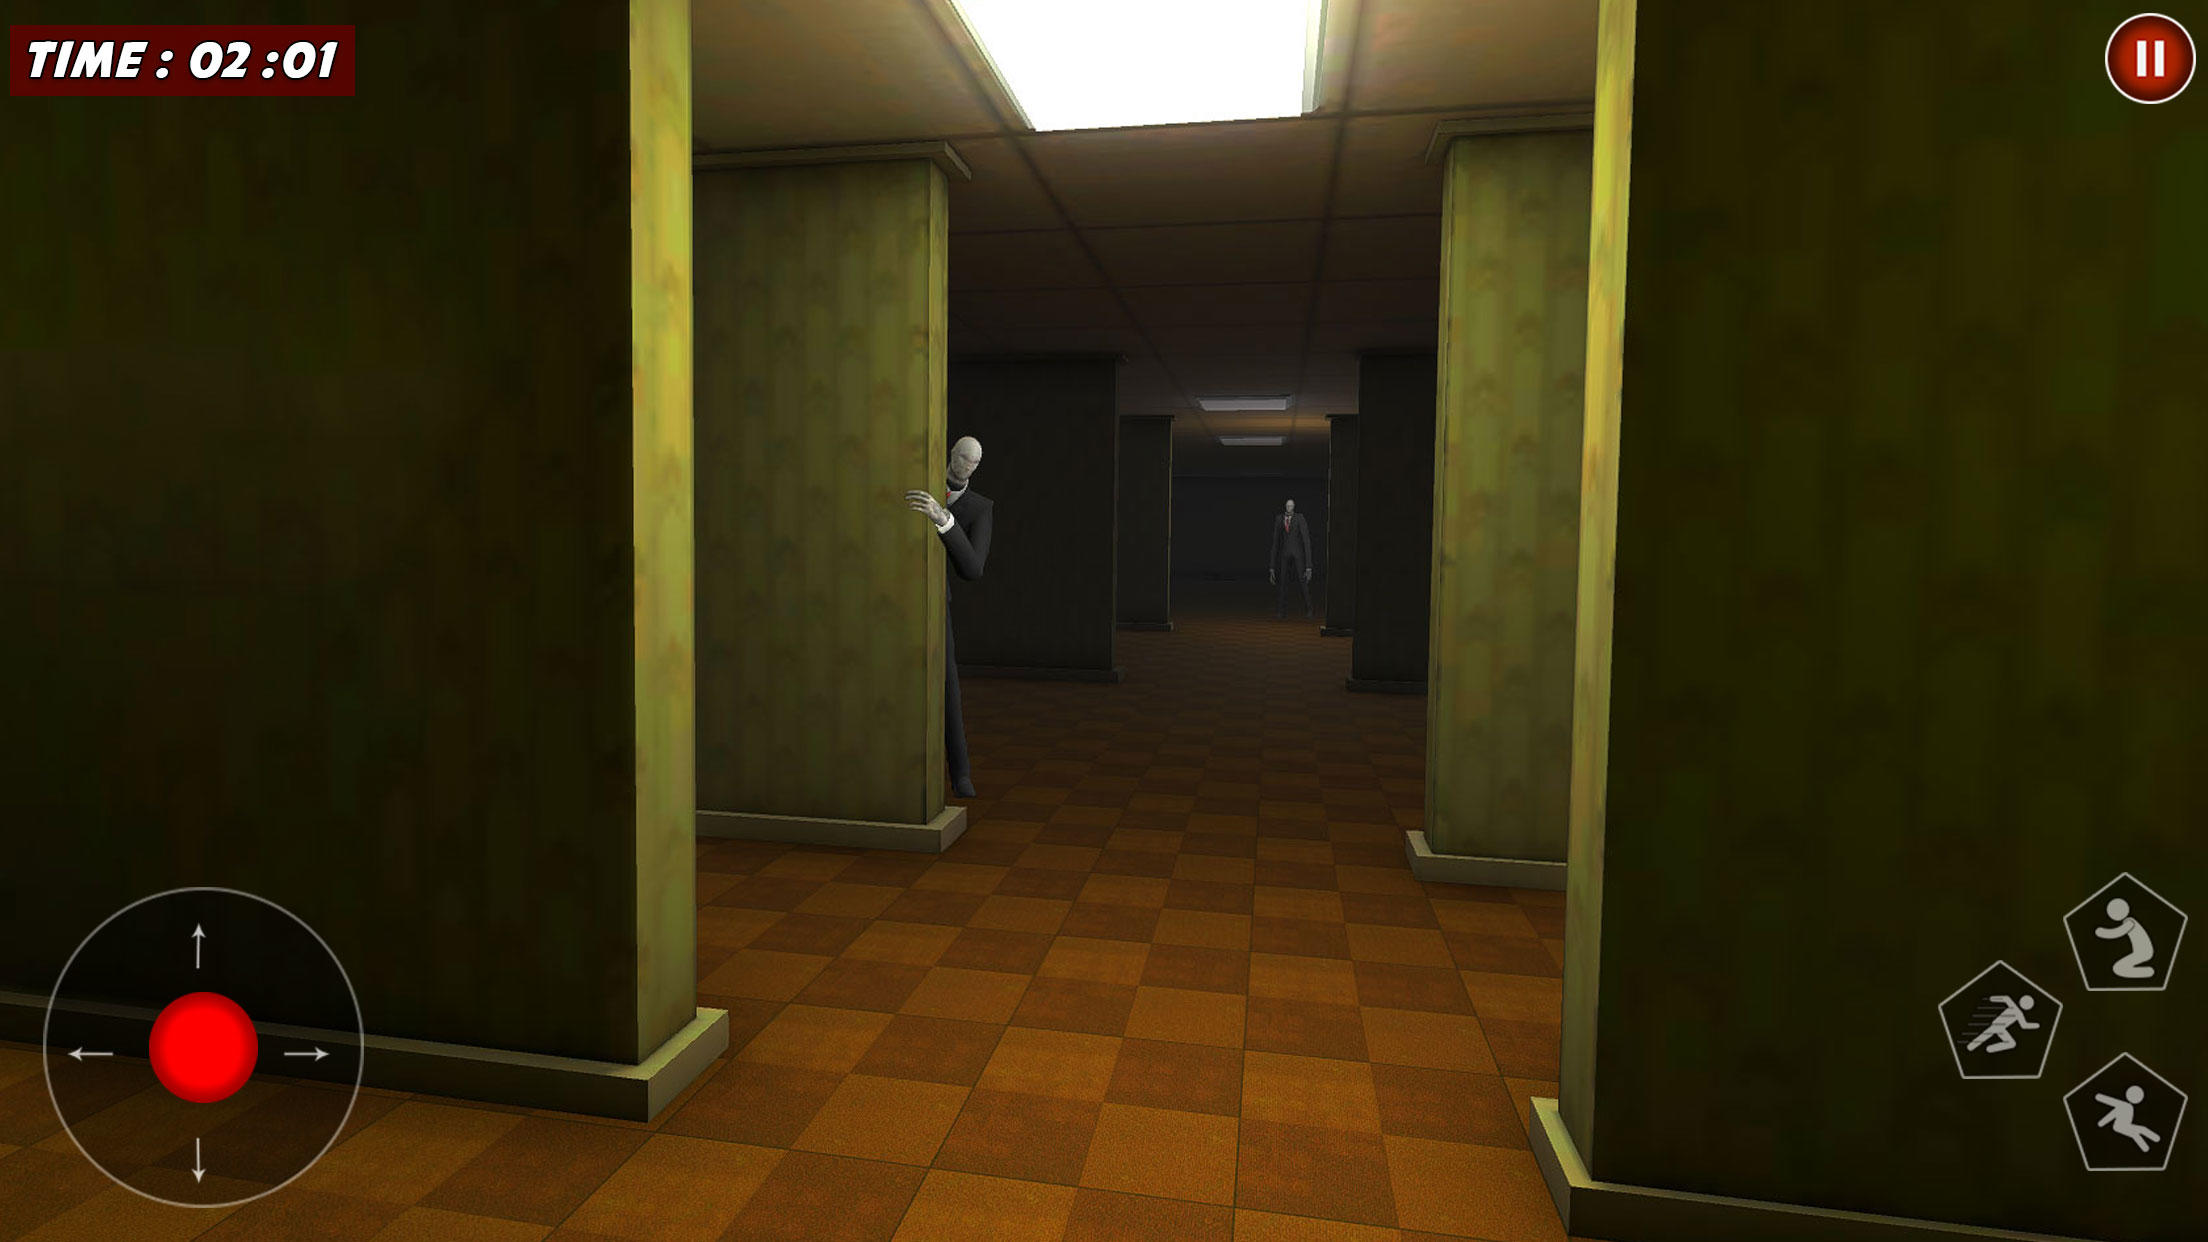 Backrooms Horror Maze Game for Android - Download